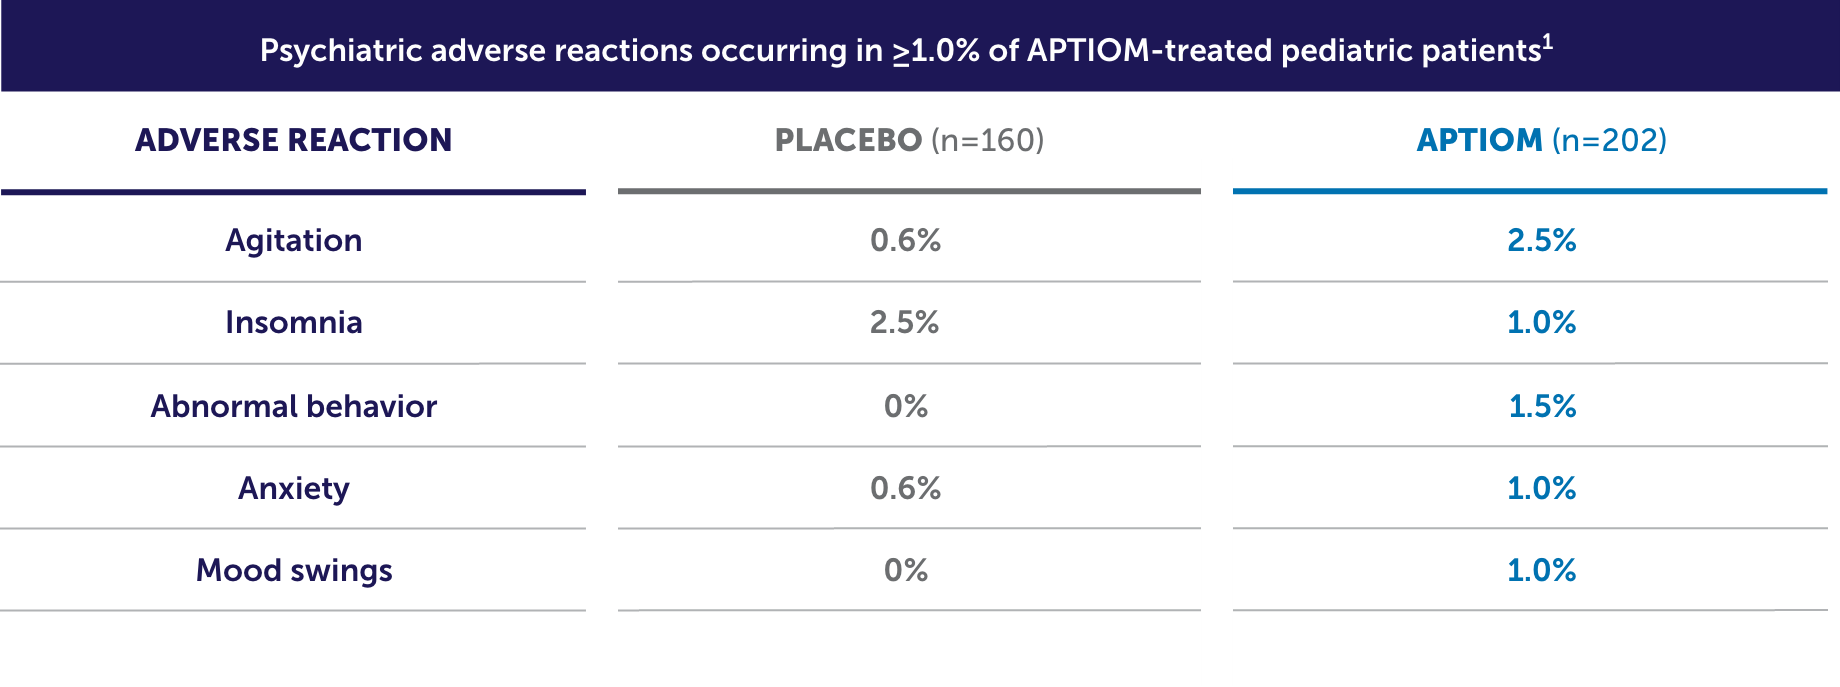 Psychiatric adverse reactions occurring in ≥1.0% of APTIOM-treated pediatric patients were agitation, insomnia, abnormal behavior, anxiety, and mood swings